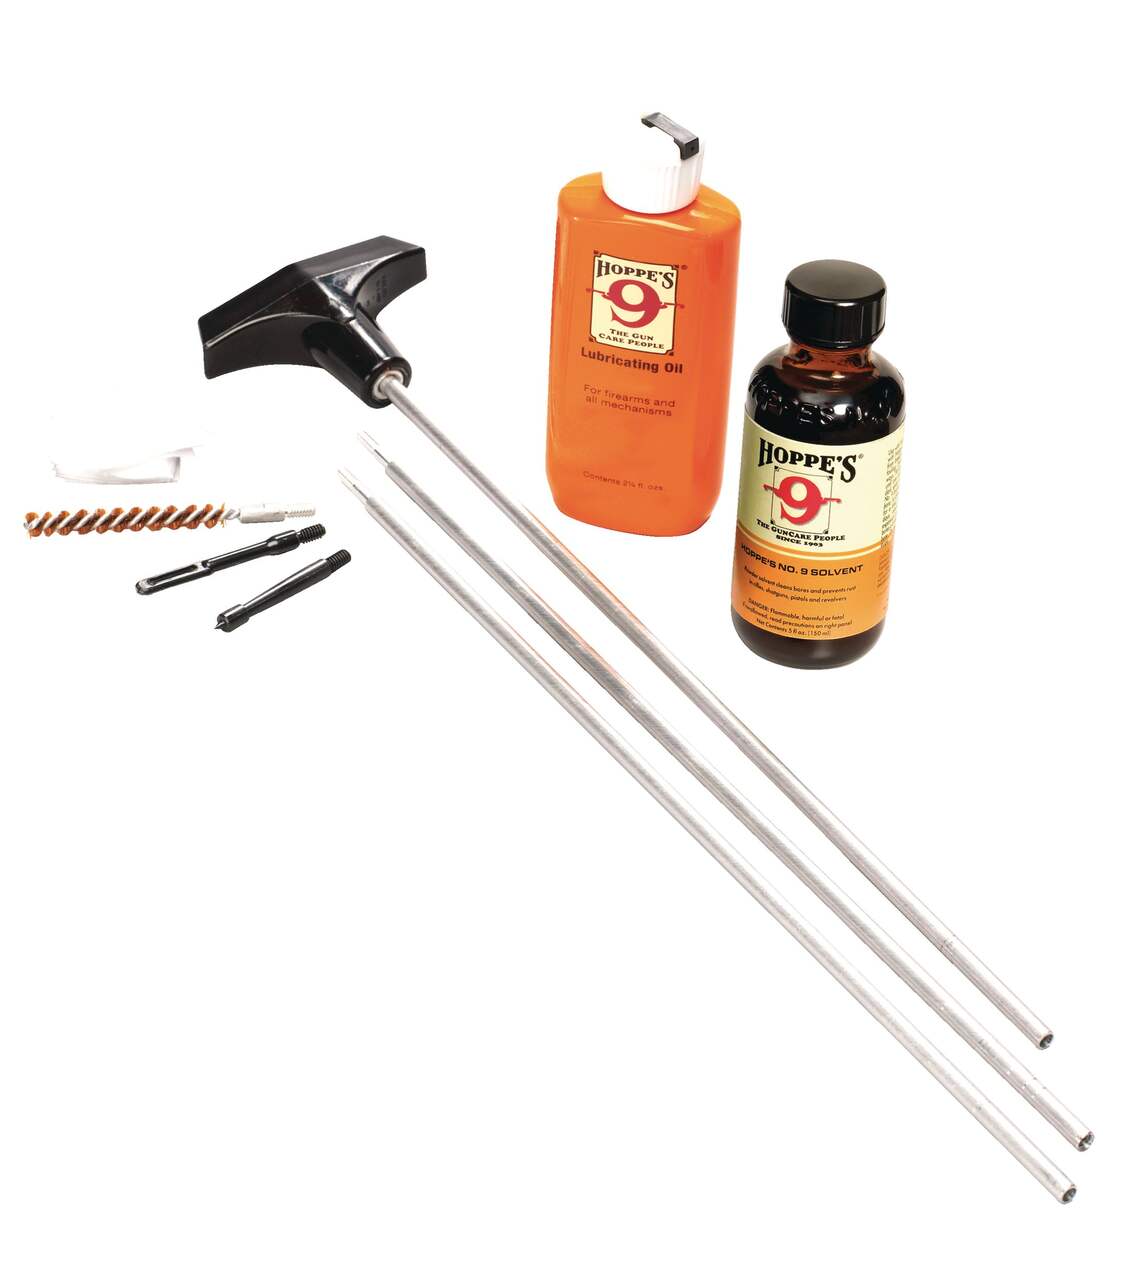 https://media-www.canadiantire.ca/product/playing/hunting/hunting-accessories/1754396/hoppe-s-cleaning-kit-22-225-caliber-with-aluminum-rod-e33fa544-8dfb-4c7e-a4d9-036b69fa83f0-jpgrendition.jpg?imdensity=1&imwidth=640&impolicy=mZoom